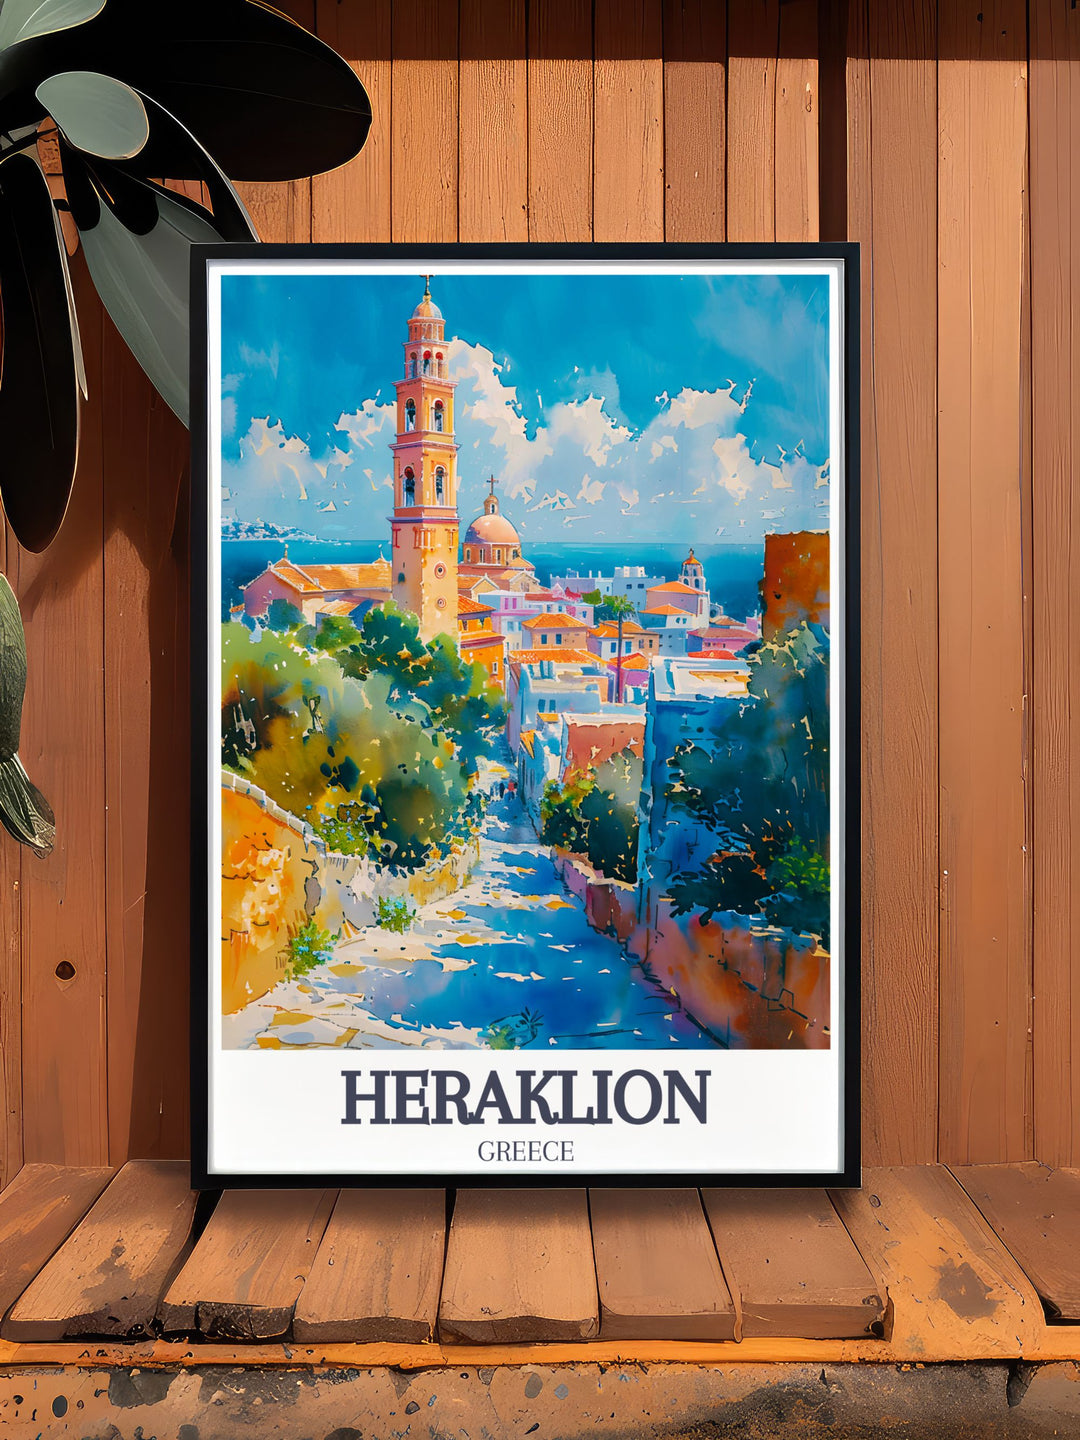 Vintage poster of Heraklion, featuring the iconic Agios Minas Cathedral, Crete, Greece. This piece captures the timeless beauty of the cathedral with its intricate frescoes, grand facade, and serene atmosphere, evoking the charm of Greek cultural heritage.